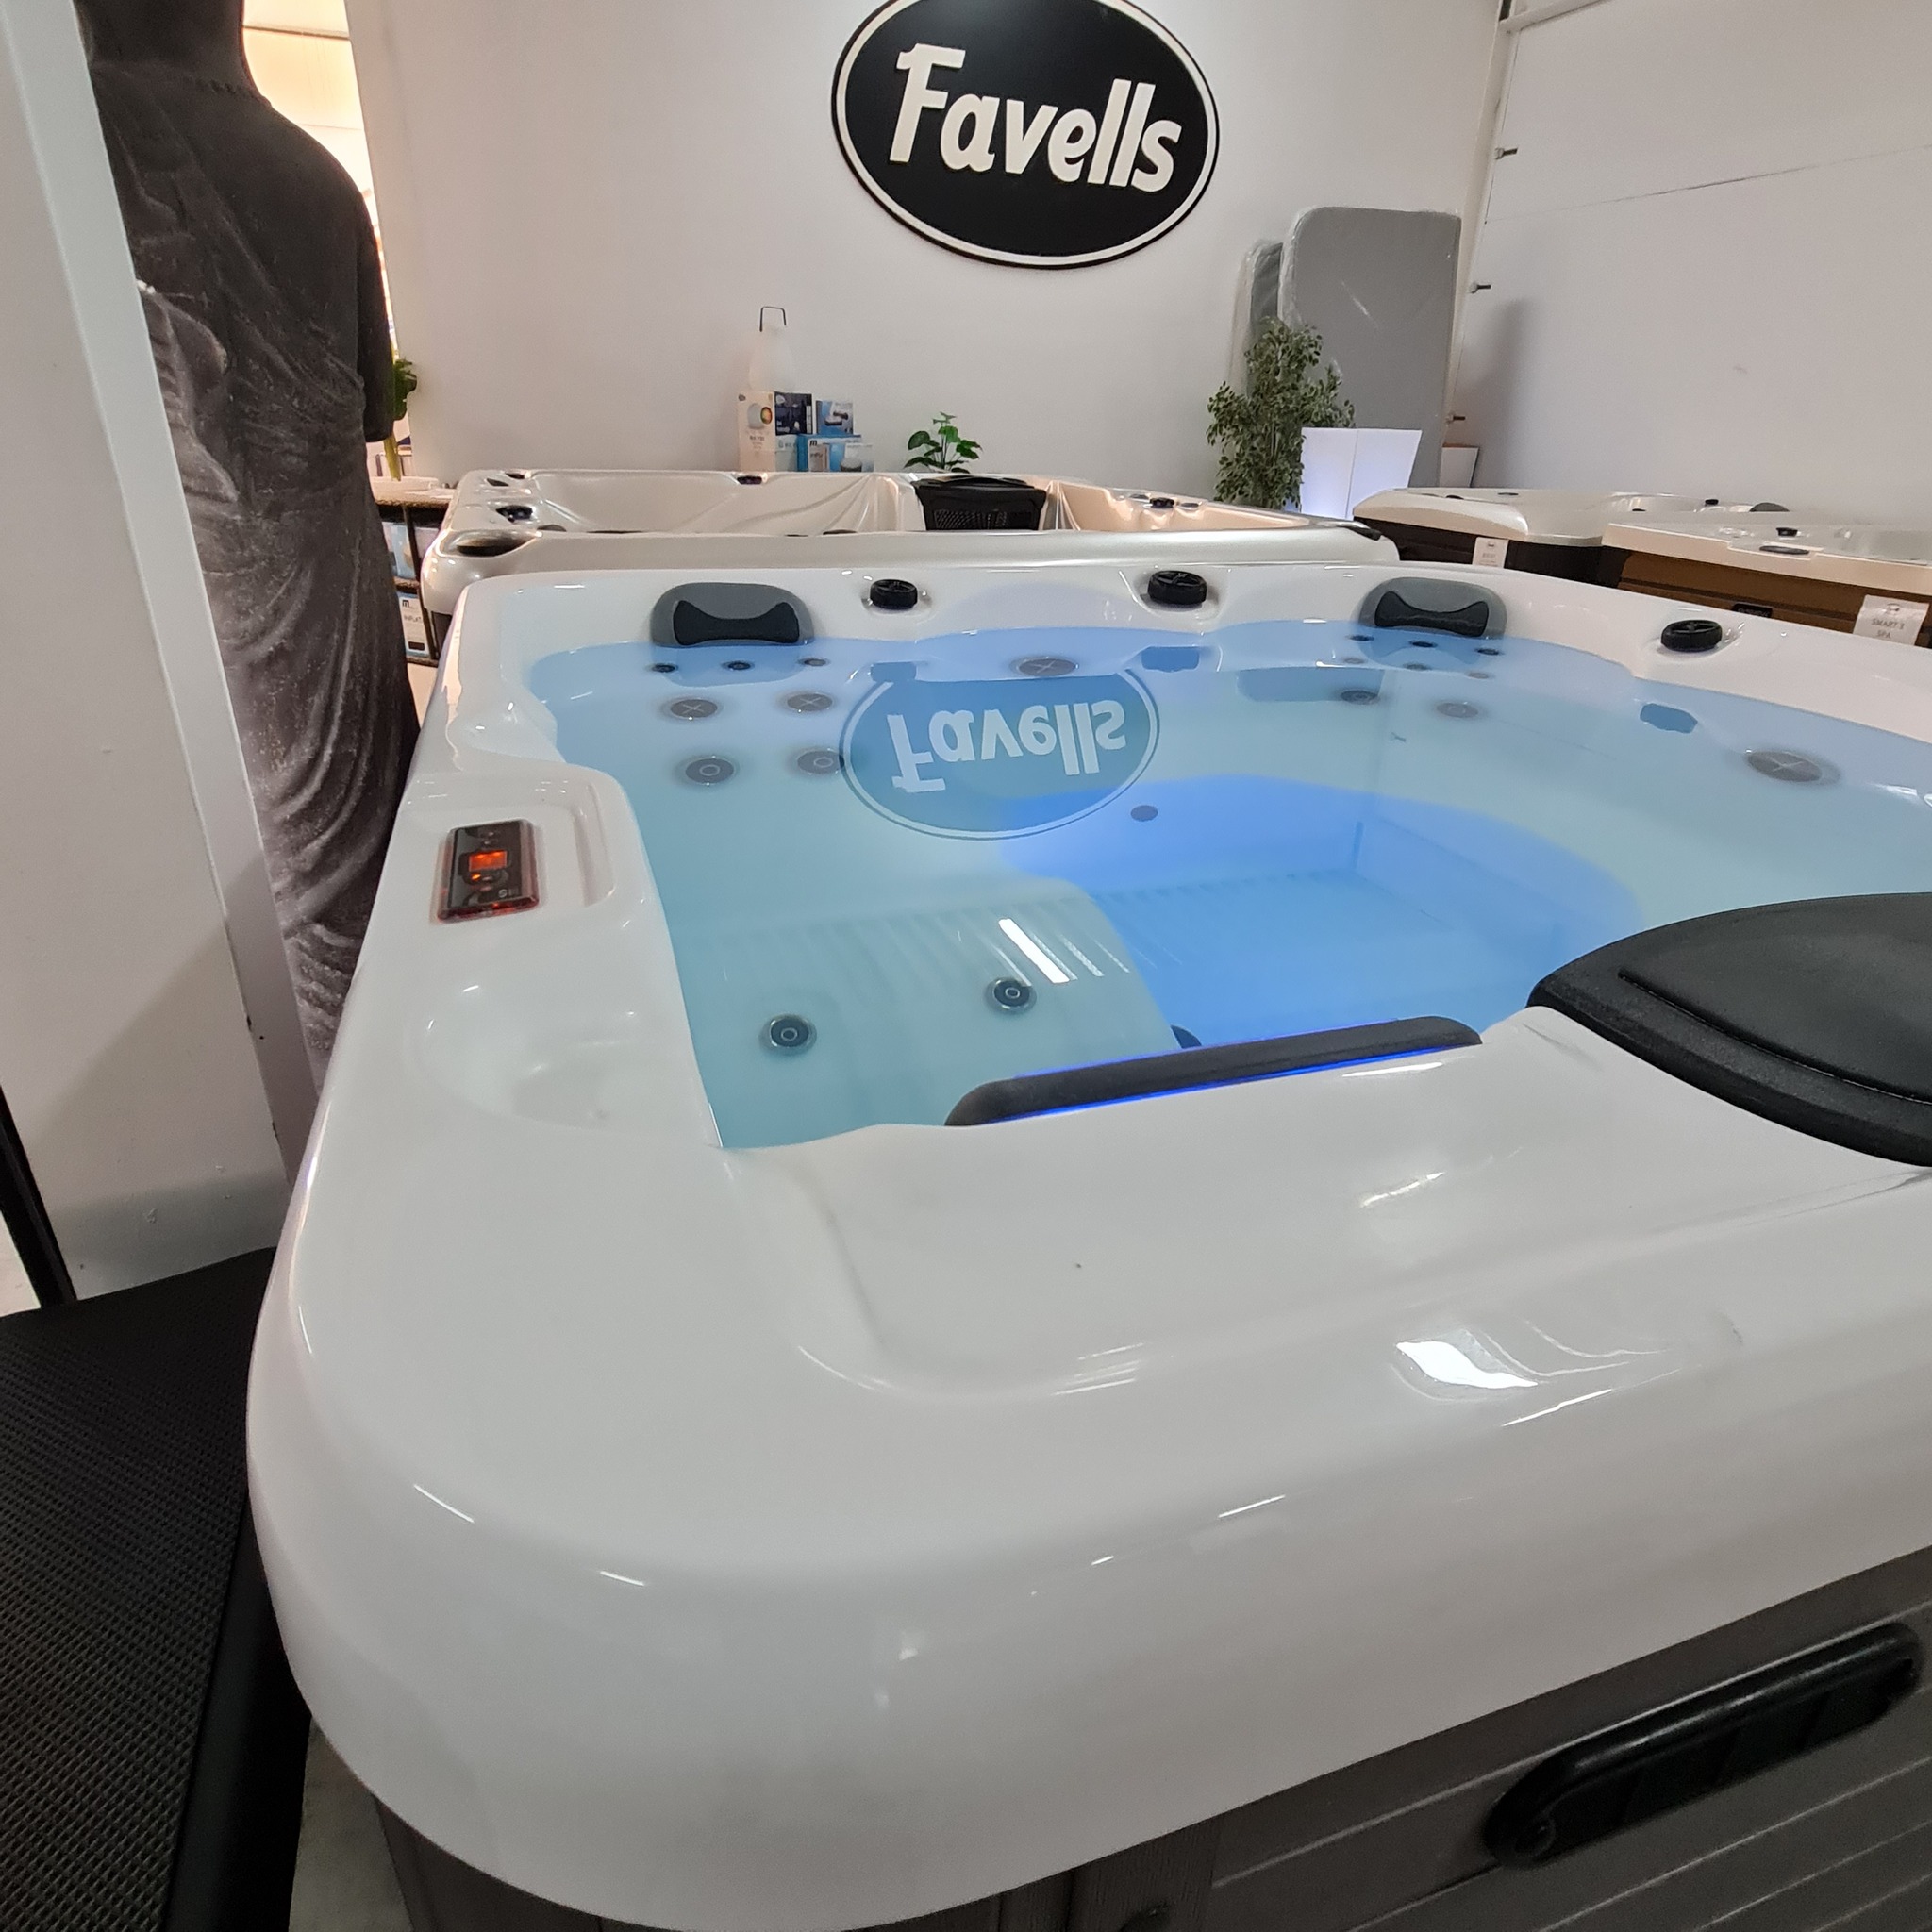 Interested in a spa? We have over 30 spas on display and always carry around 150 spas in stock, available for immediate ... » Outdoor Furniture Fuengirola, Costa Del Sol, Spain